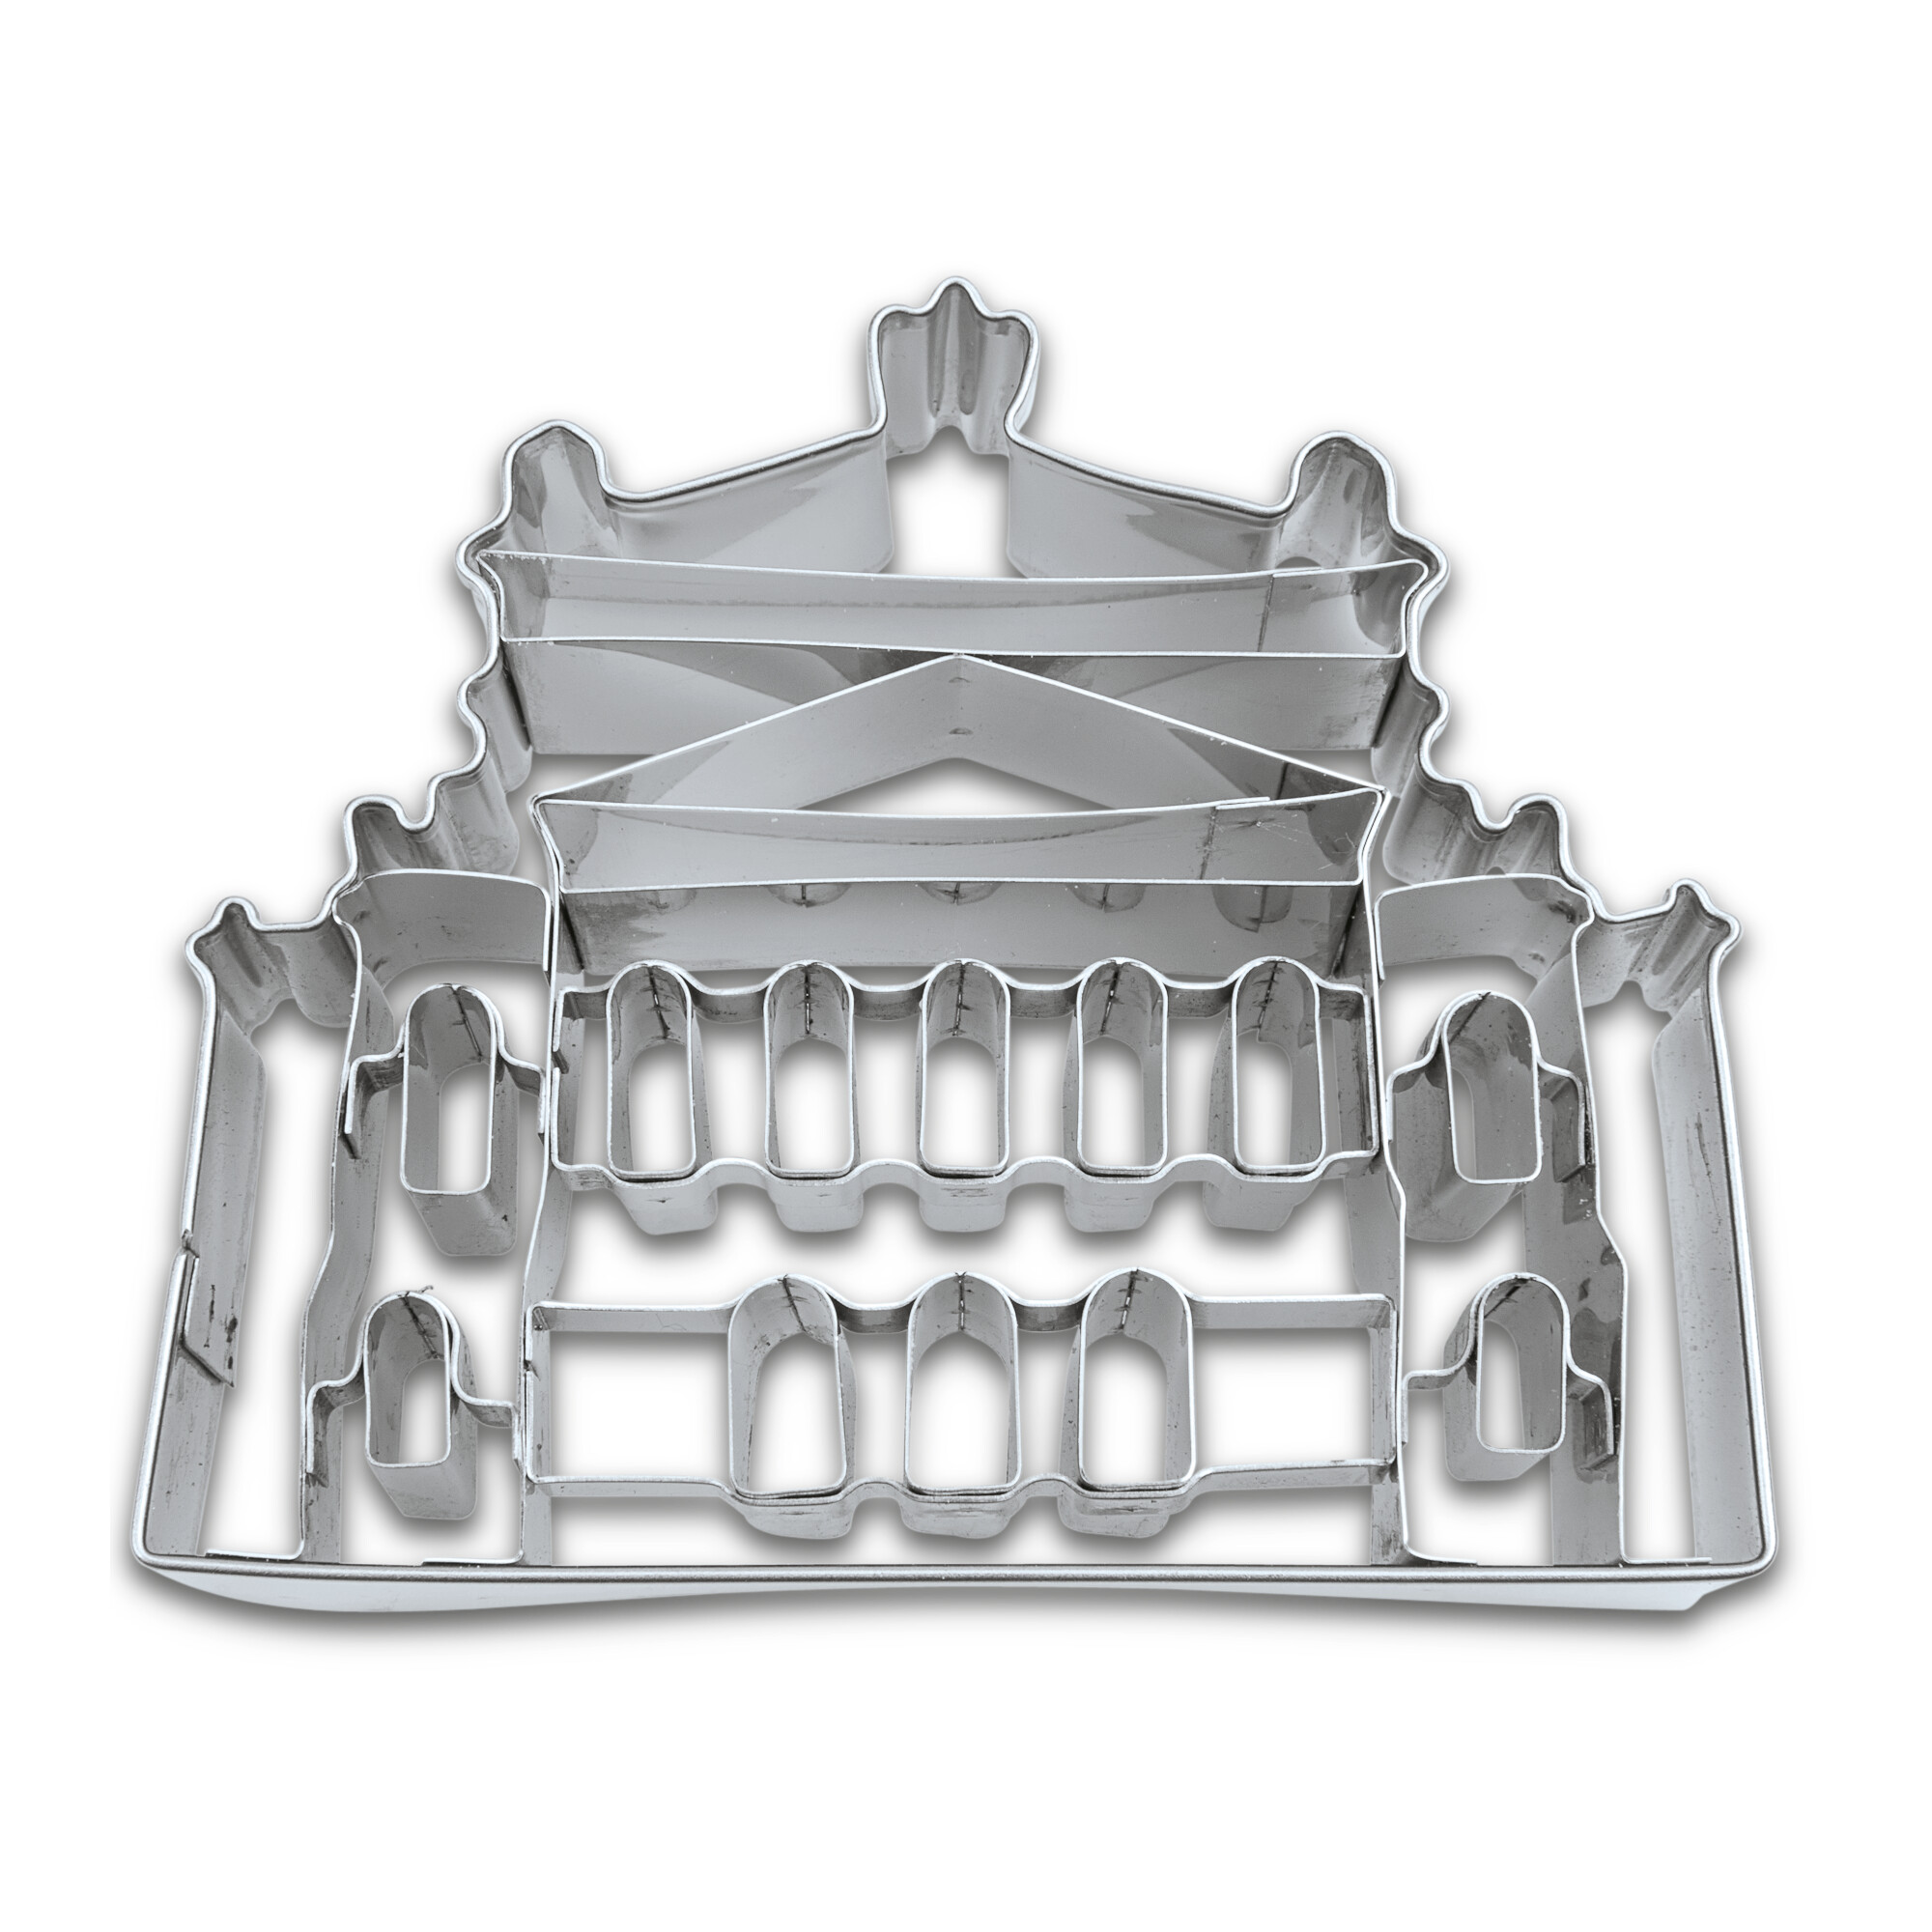 Cookie cutter with stamp – Old opera Frankfurt